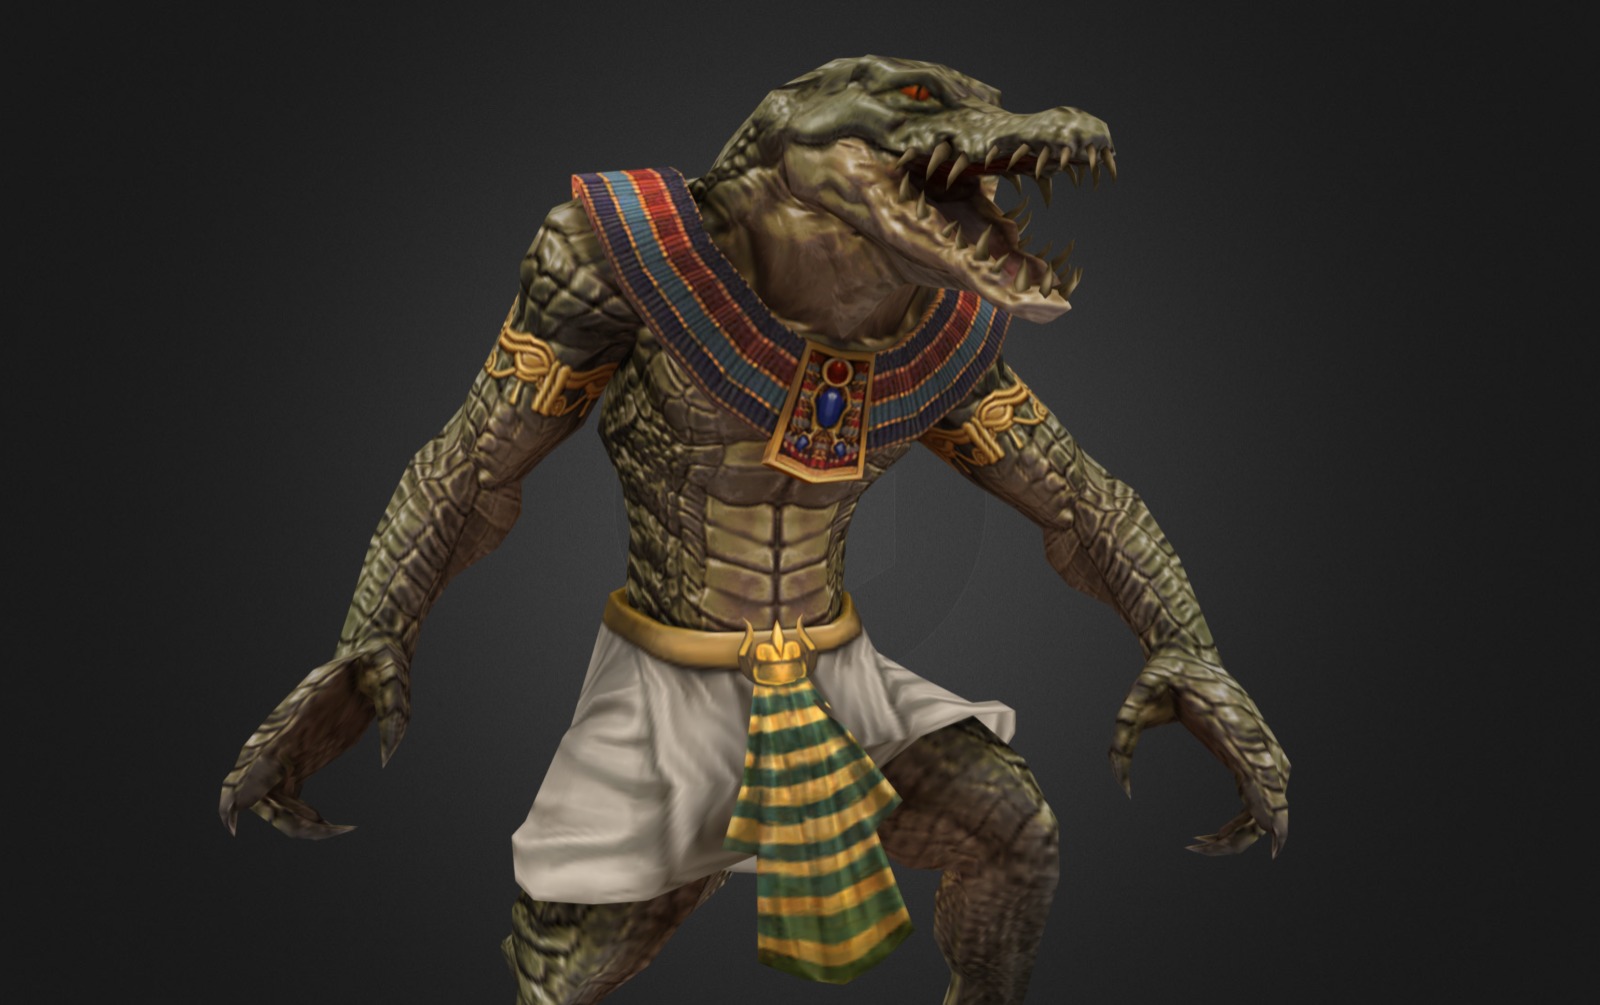 Diffuse 512 x 1

원화 신서영 

모델링 문동화

normal map, Complete map mix - Egypt Crocodile Man - Gunpie Adventure - 3D model by Moon dong hwa (@moondonghwa) 3d model